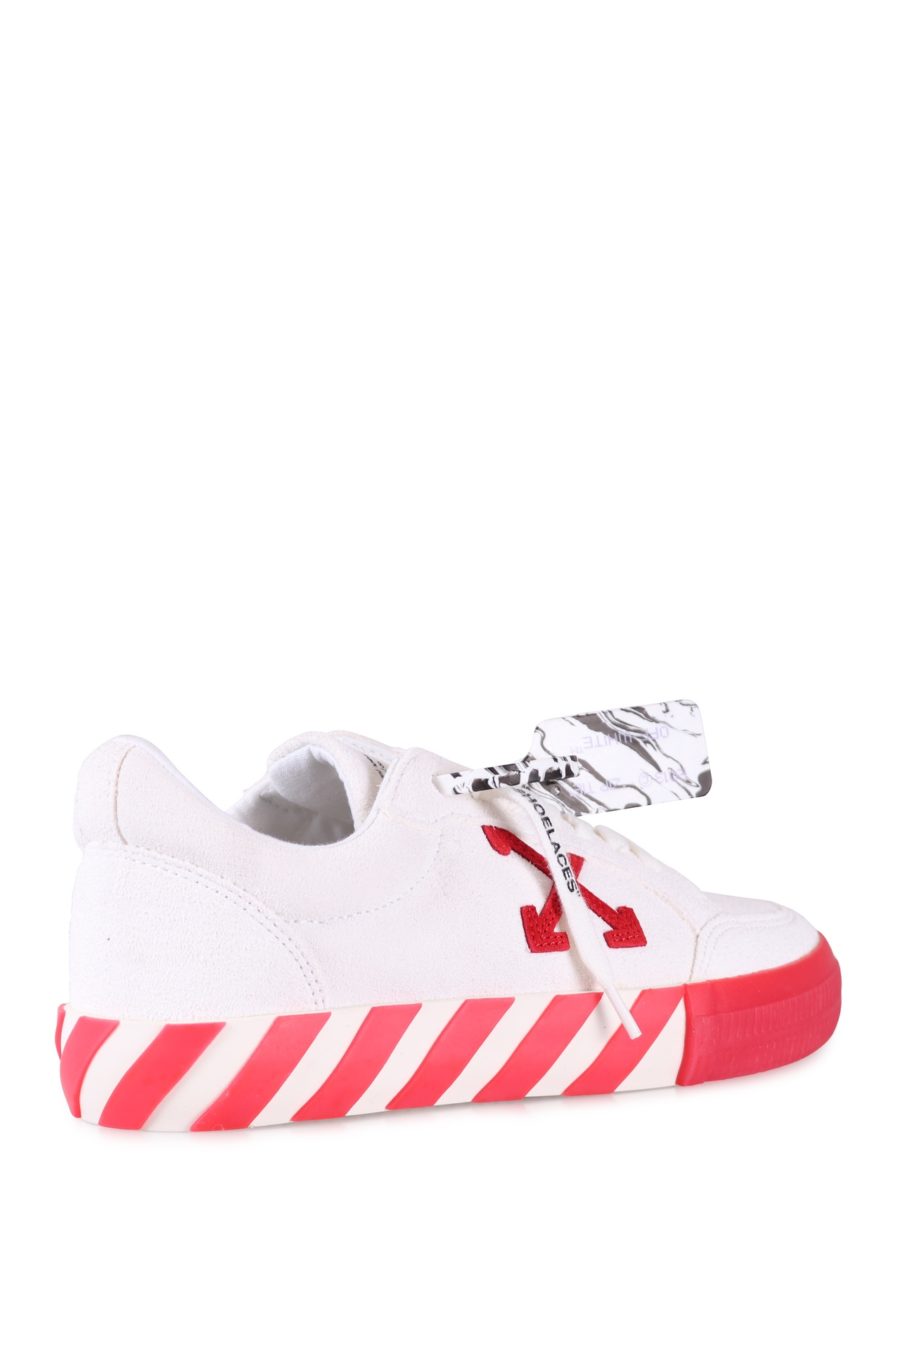 Trainers Off-White white with red - 5928da66c88c9bb48bf3a681e380b003be2bf2fb